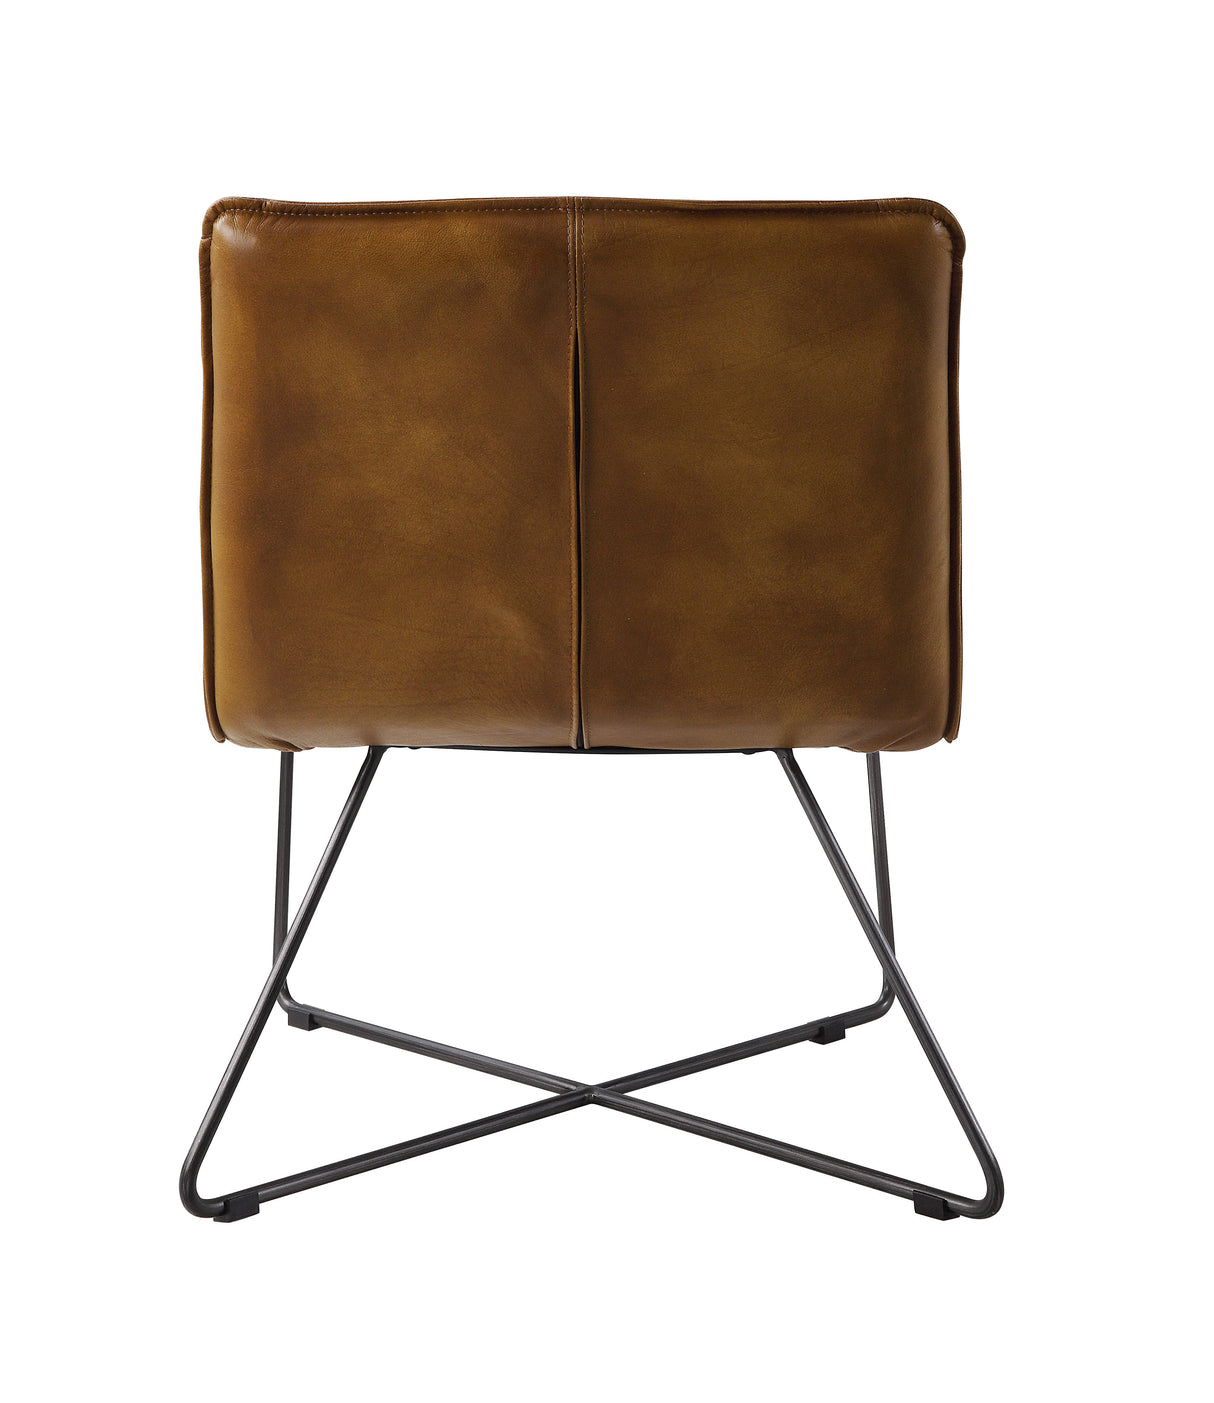 Acme - Balrog Accent Chair 59671 Saddle Brown Top Grain Leather